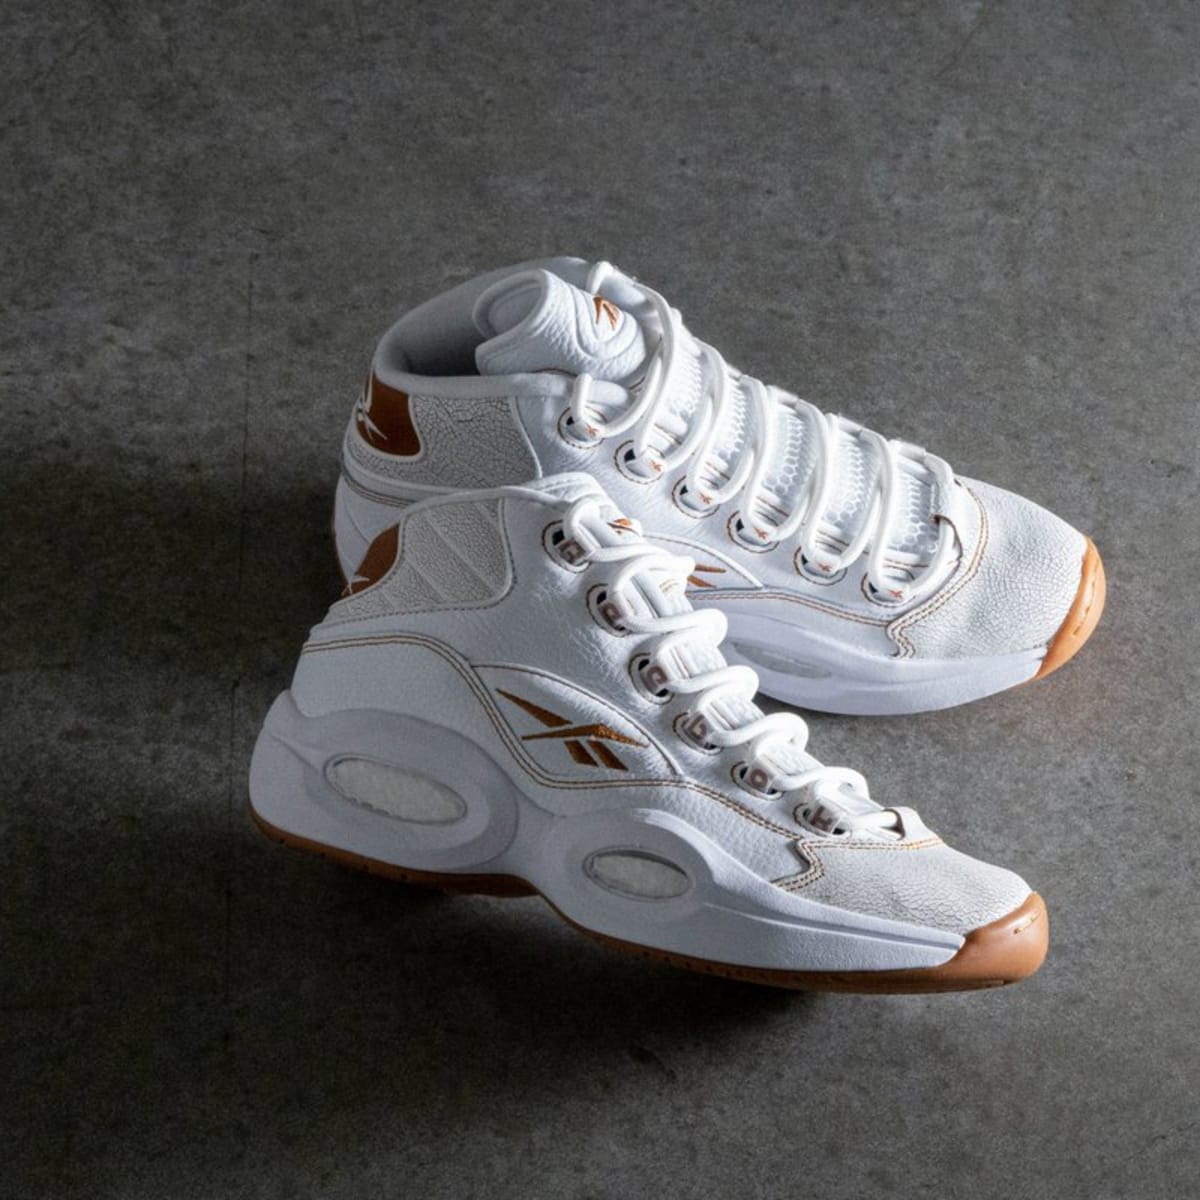 The Reebok Question Mid 'Tobacco' Release Information - Sports Illustrated  FanNation Kicks News, Analysis and More